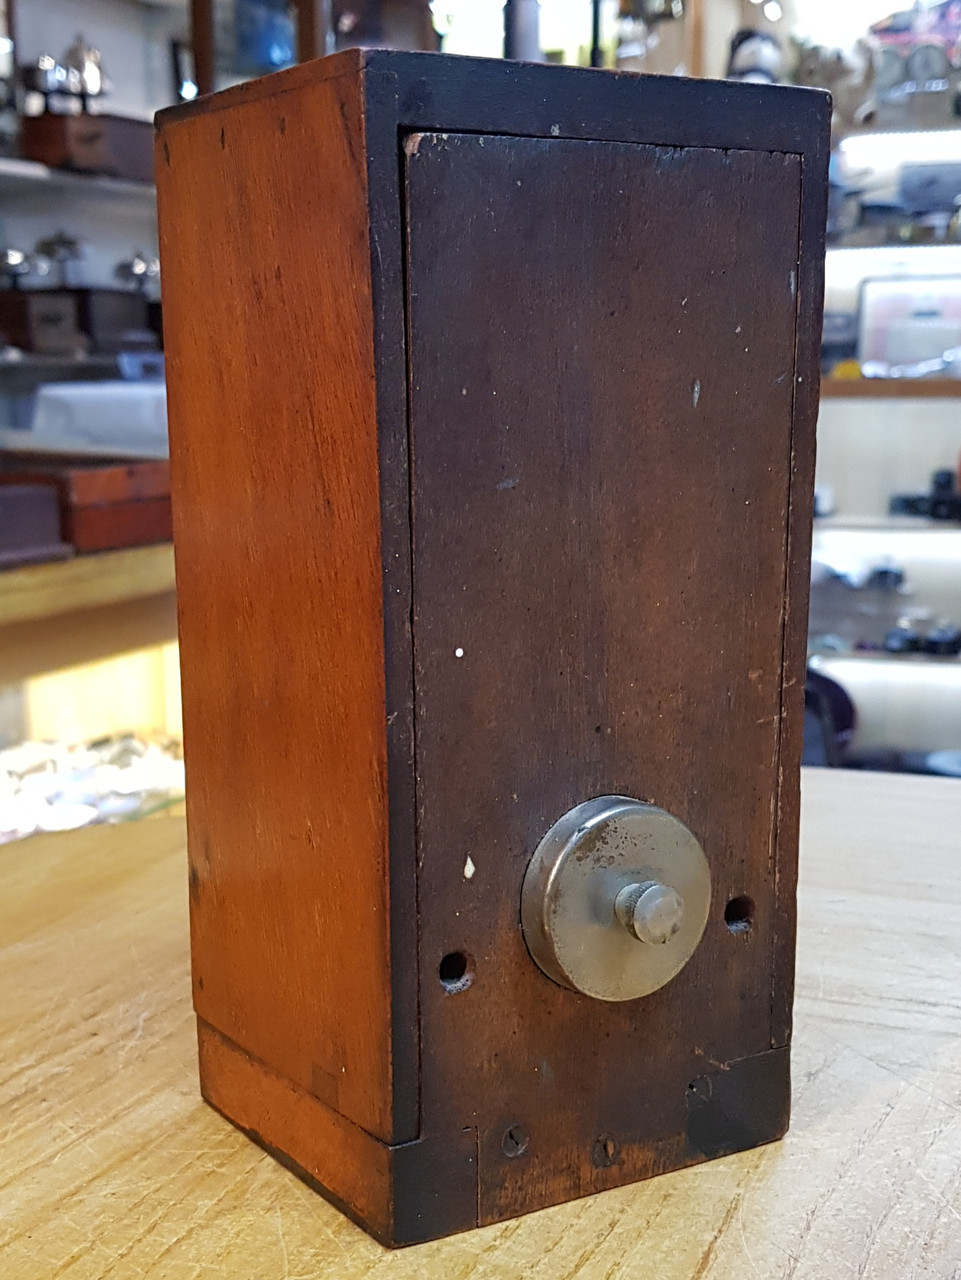 VT 3237. GREAT WESTERN RAILWAY TYERS  WOOD CASED SIGNAL ARM REPEATER.